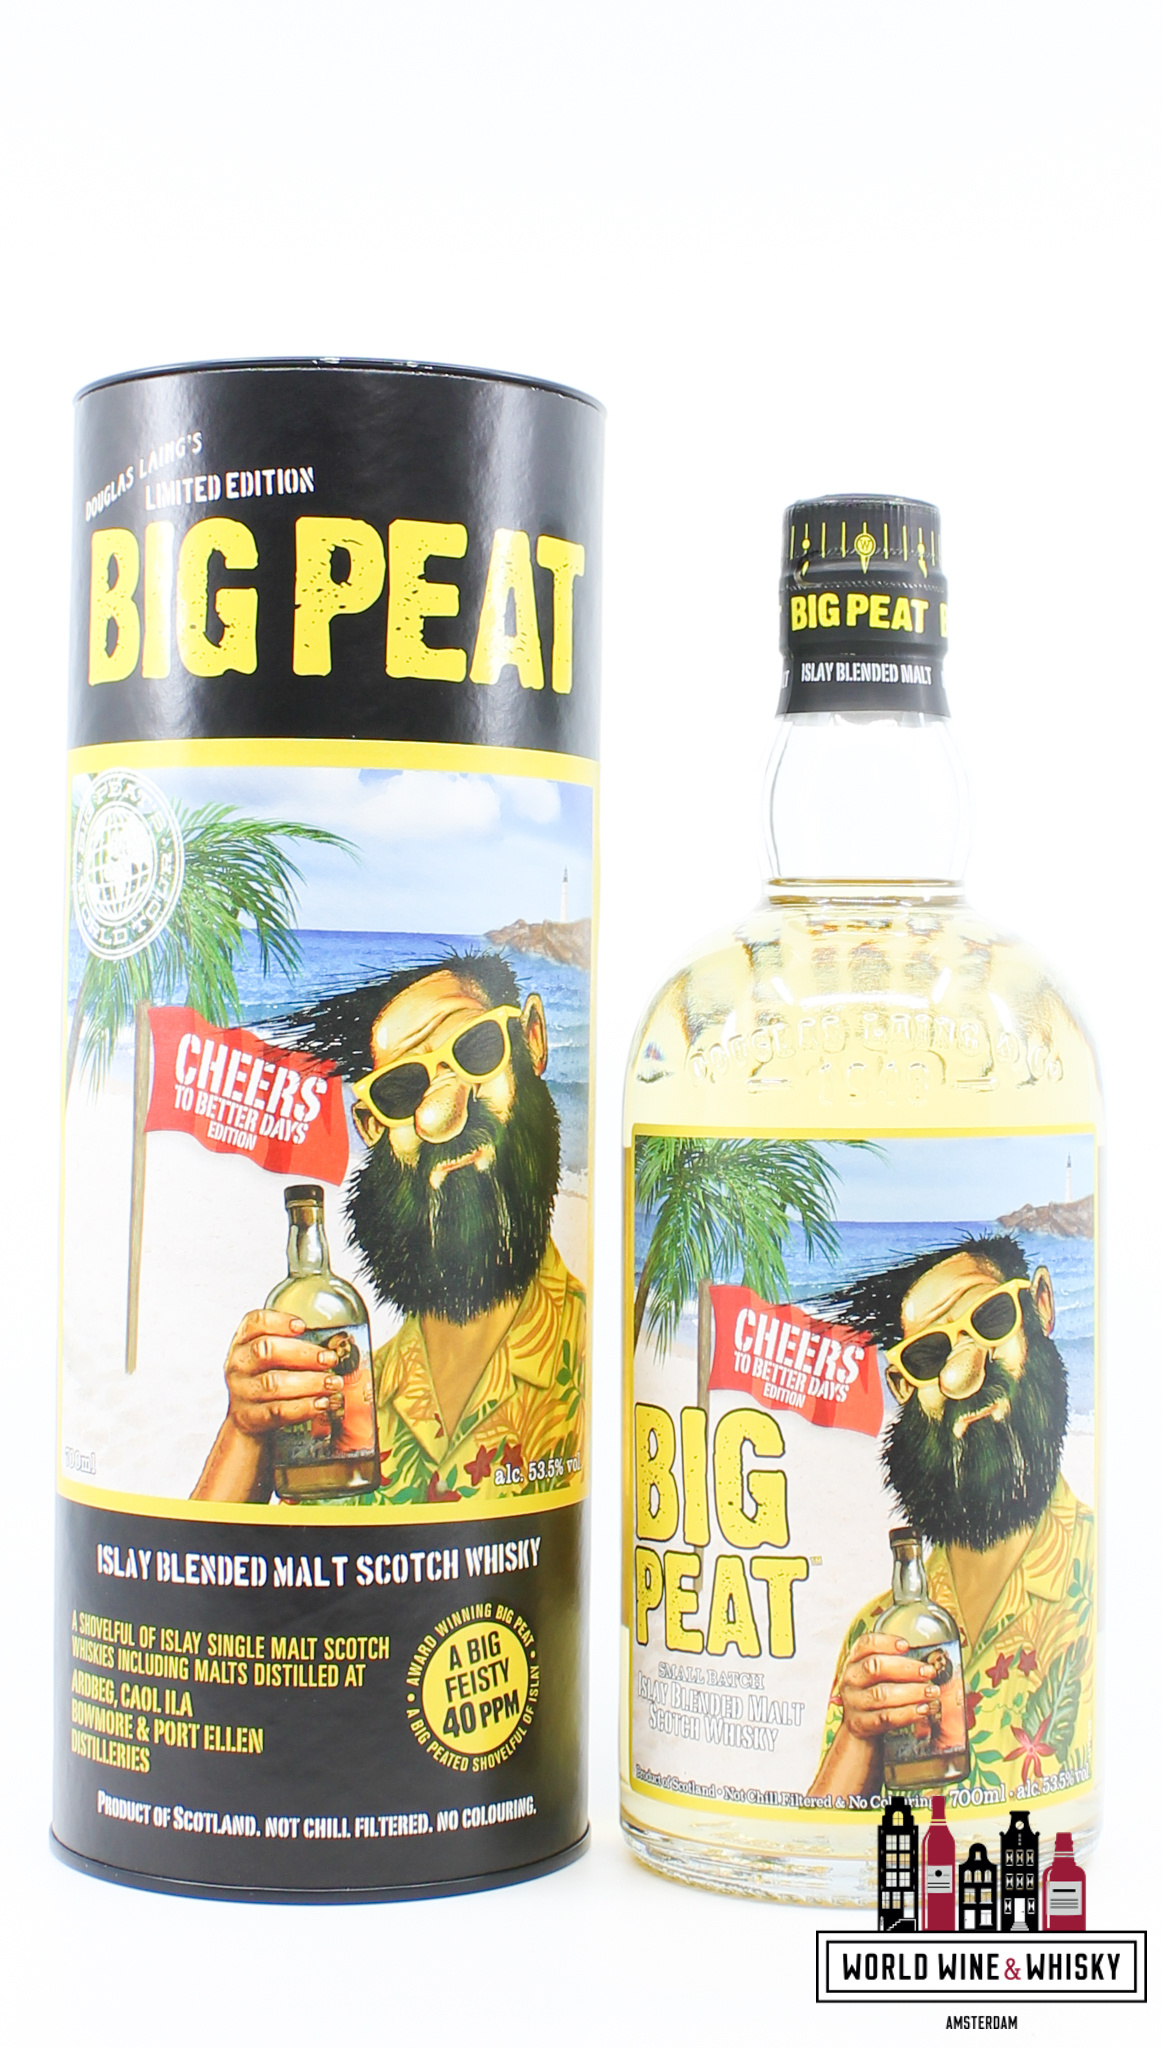 Big Peat 2021 - Small Batch - Cheers to better days Edition DL 53.5% -  World Wine & Whisky